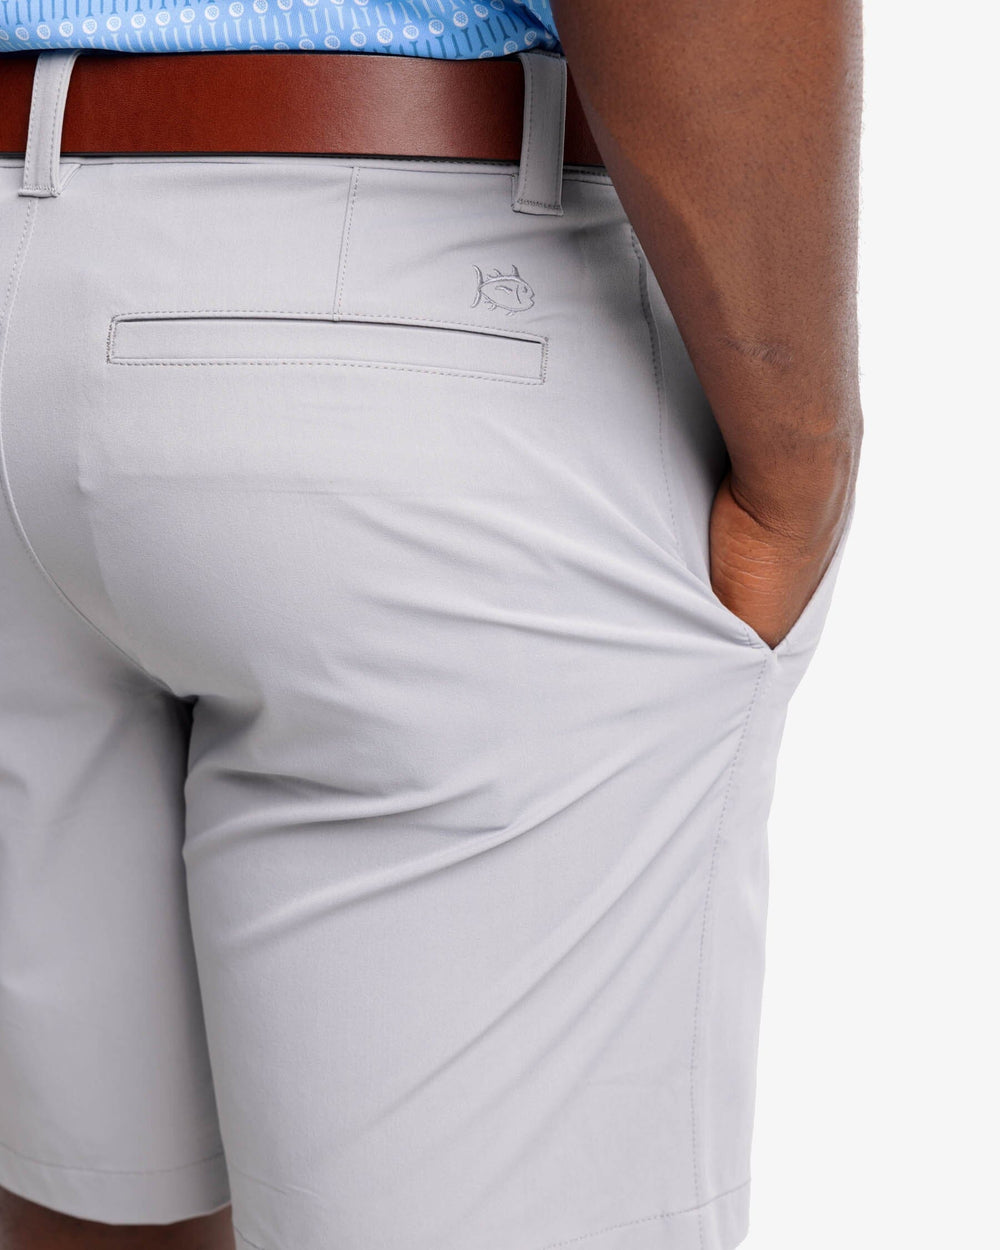 The detail view of the Southern Tide brrr die performance short 1 by Southern Tide - Steel Grey